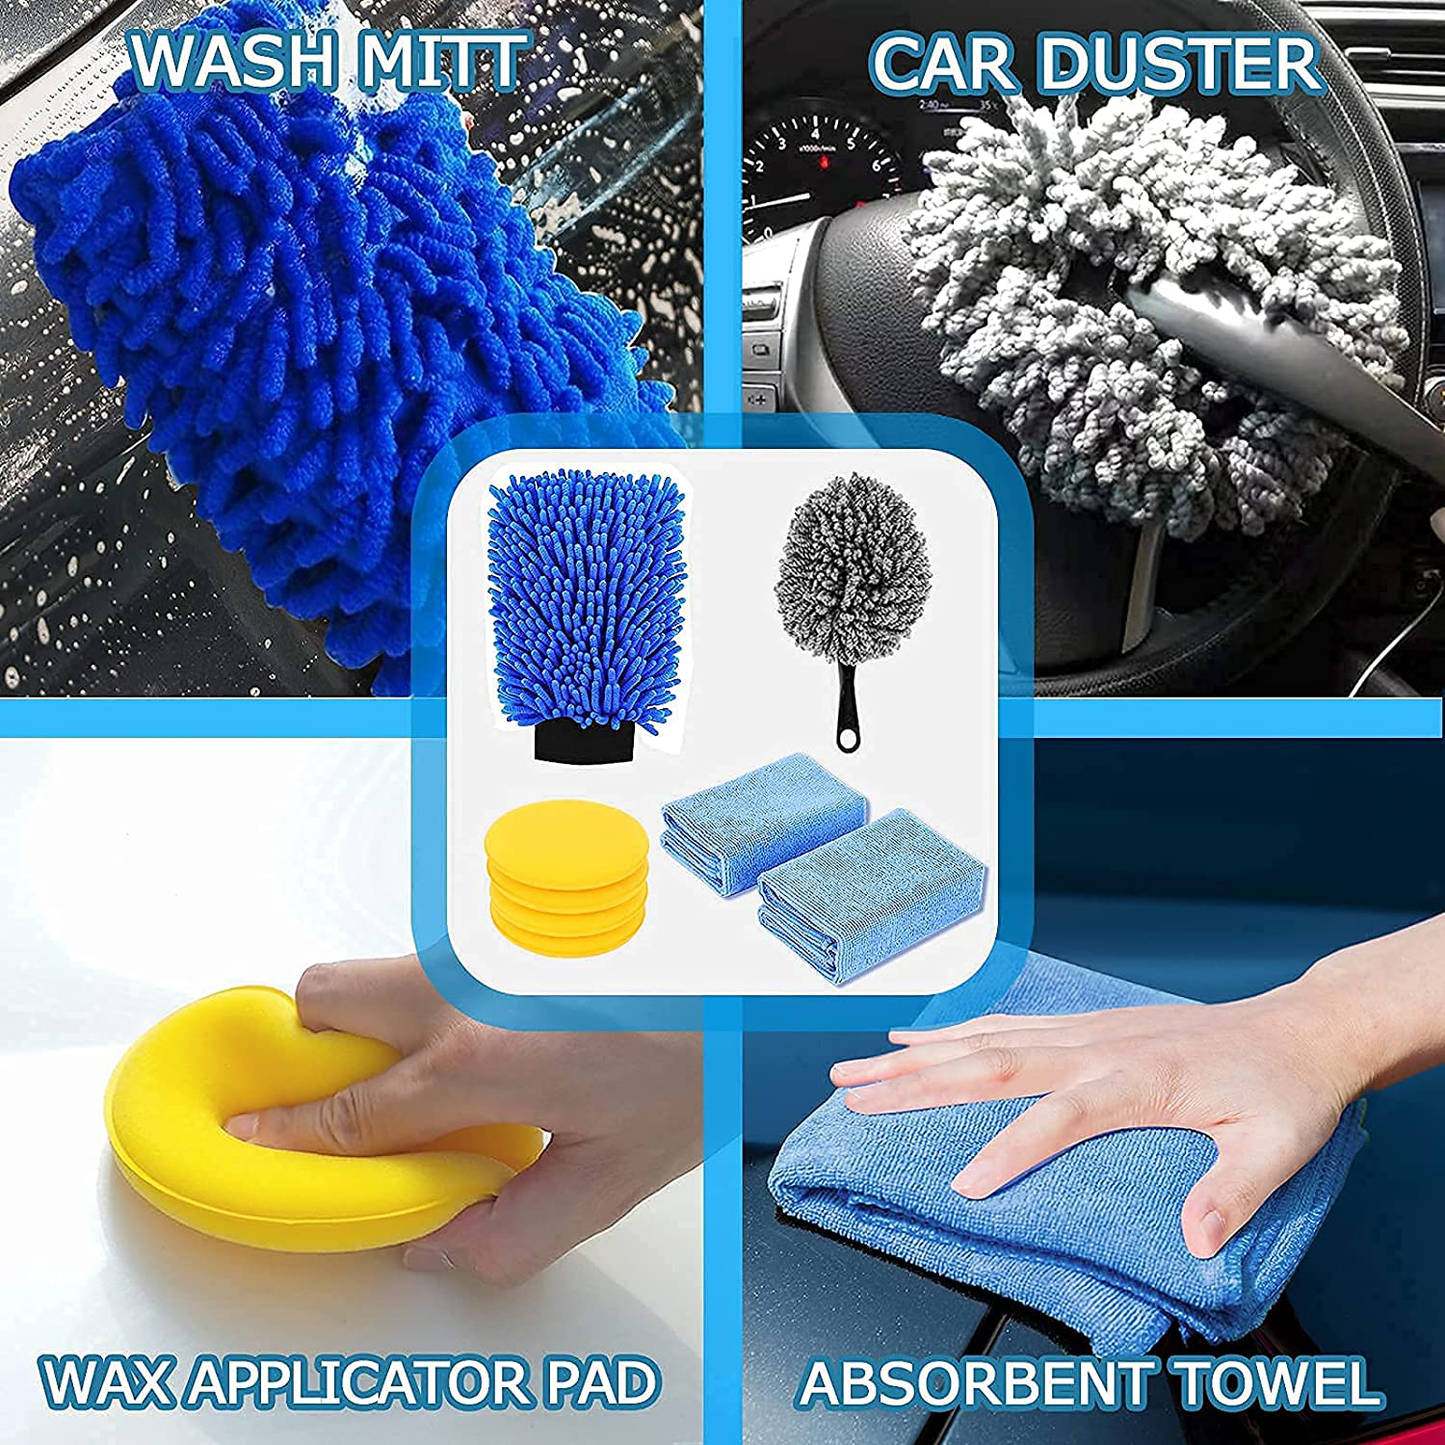 Kodagia 22pcs Car Wash Kit Car Detailing Kit Cleaning Tool Sets with Collapsible Bucket, Microfiber Towel, Tire Brush, Window Scraper, Car Wash Sponges and Dust Cleaning Gel Complete Car Care Kit